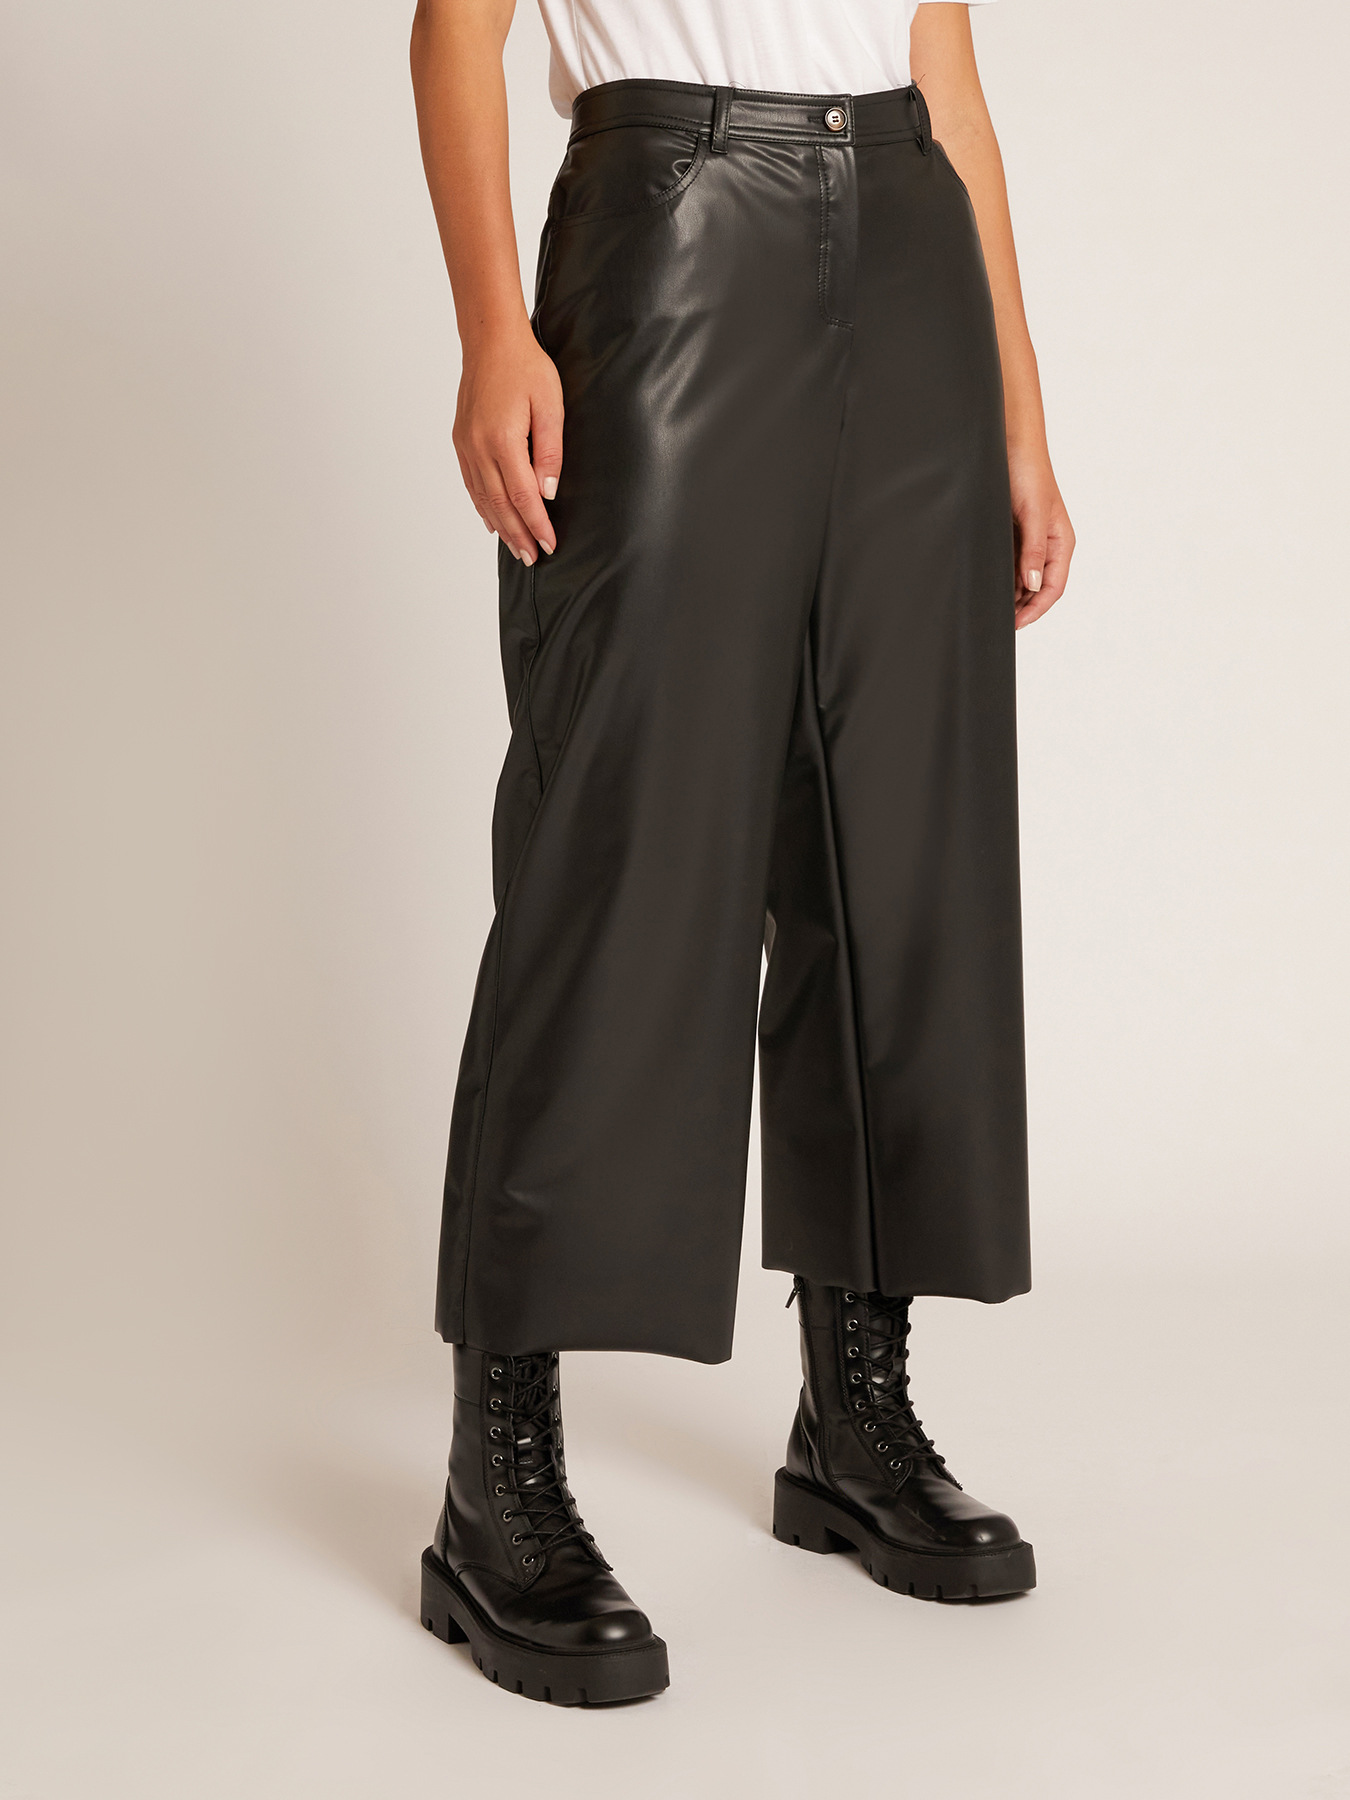 Black Faux Leather Straight Leg Trousers | TALLY WEiJL Netherlands